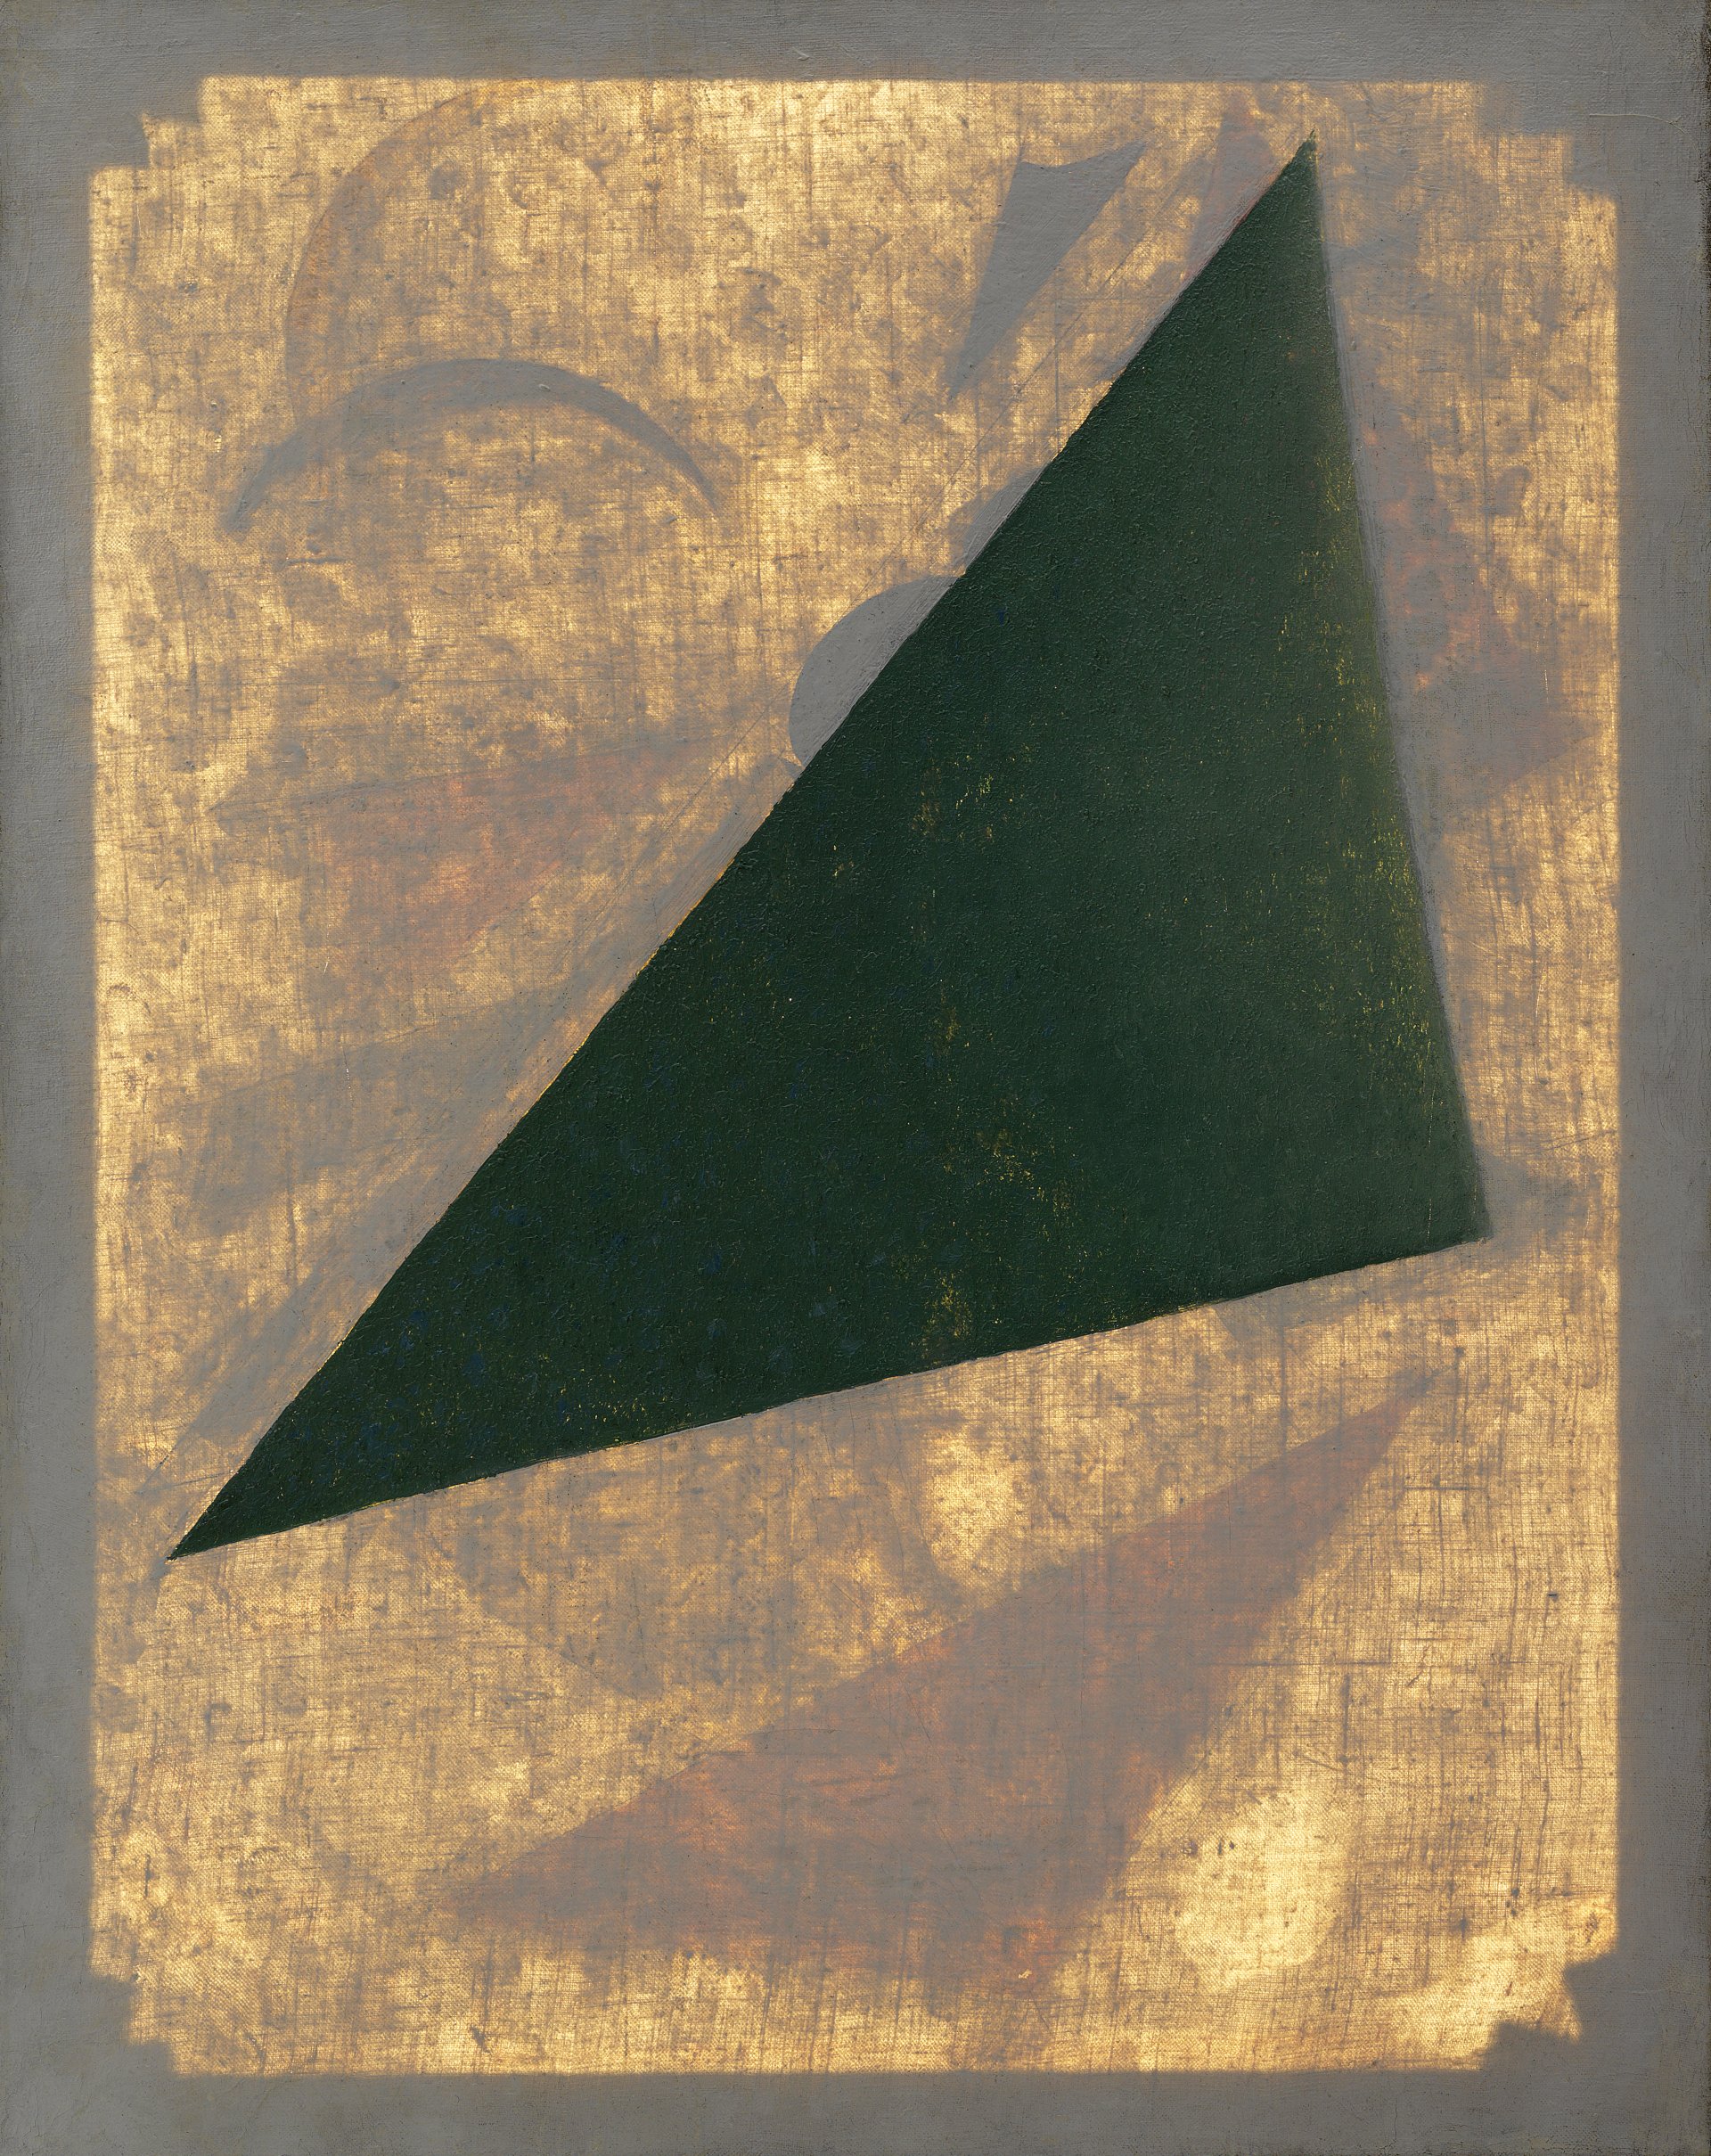 Image captured with transmitted light of Kliun's painting "Composition"